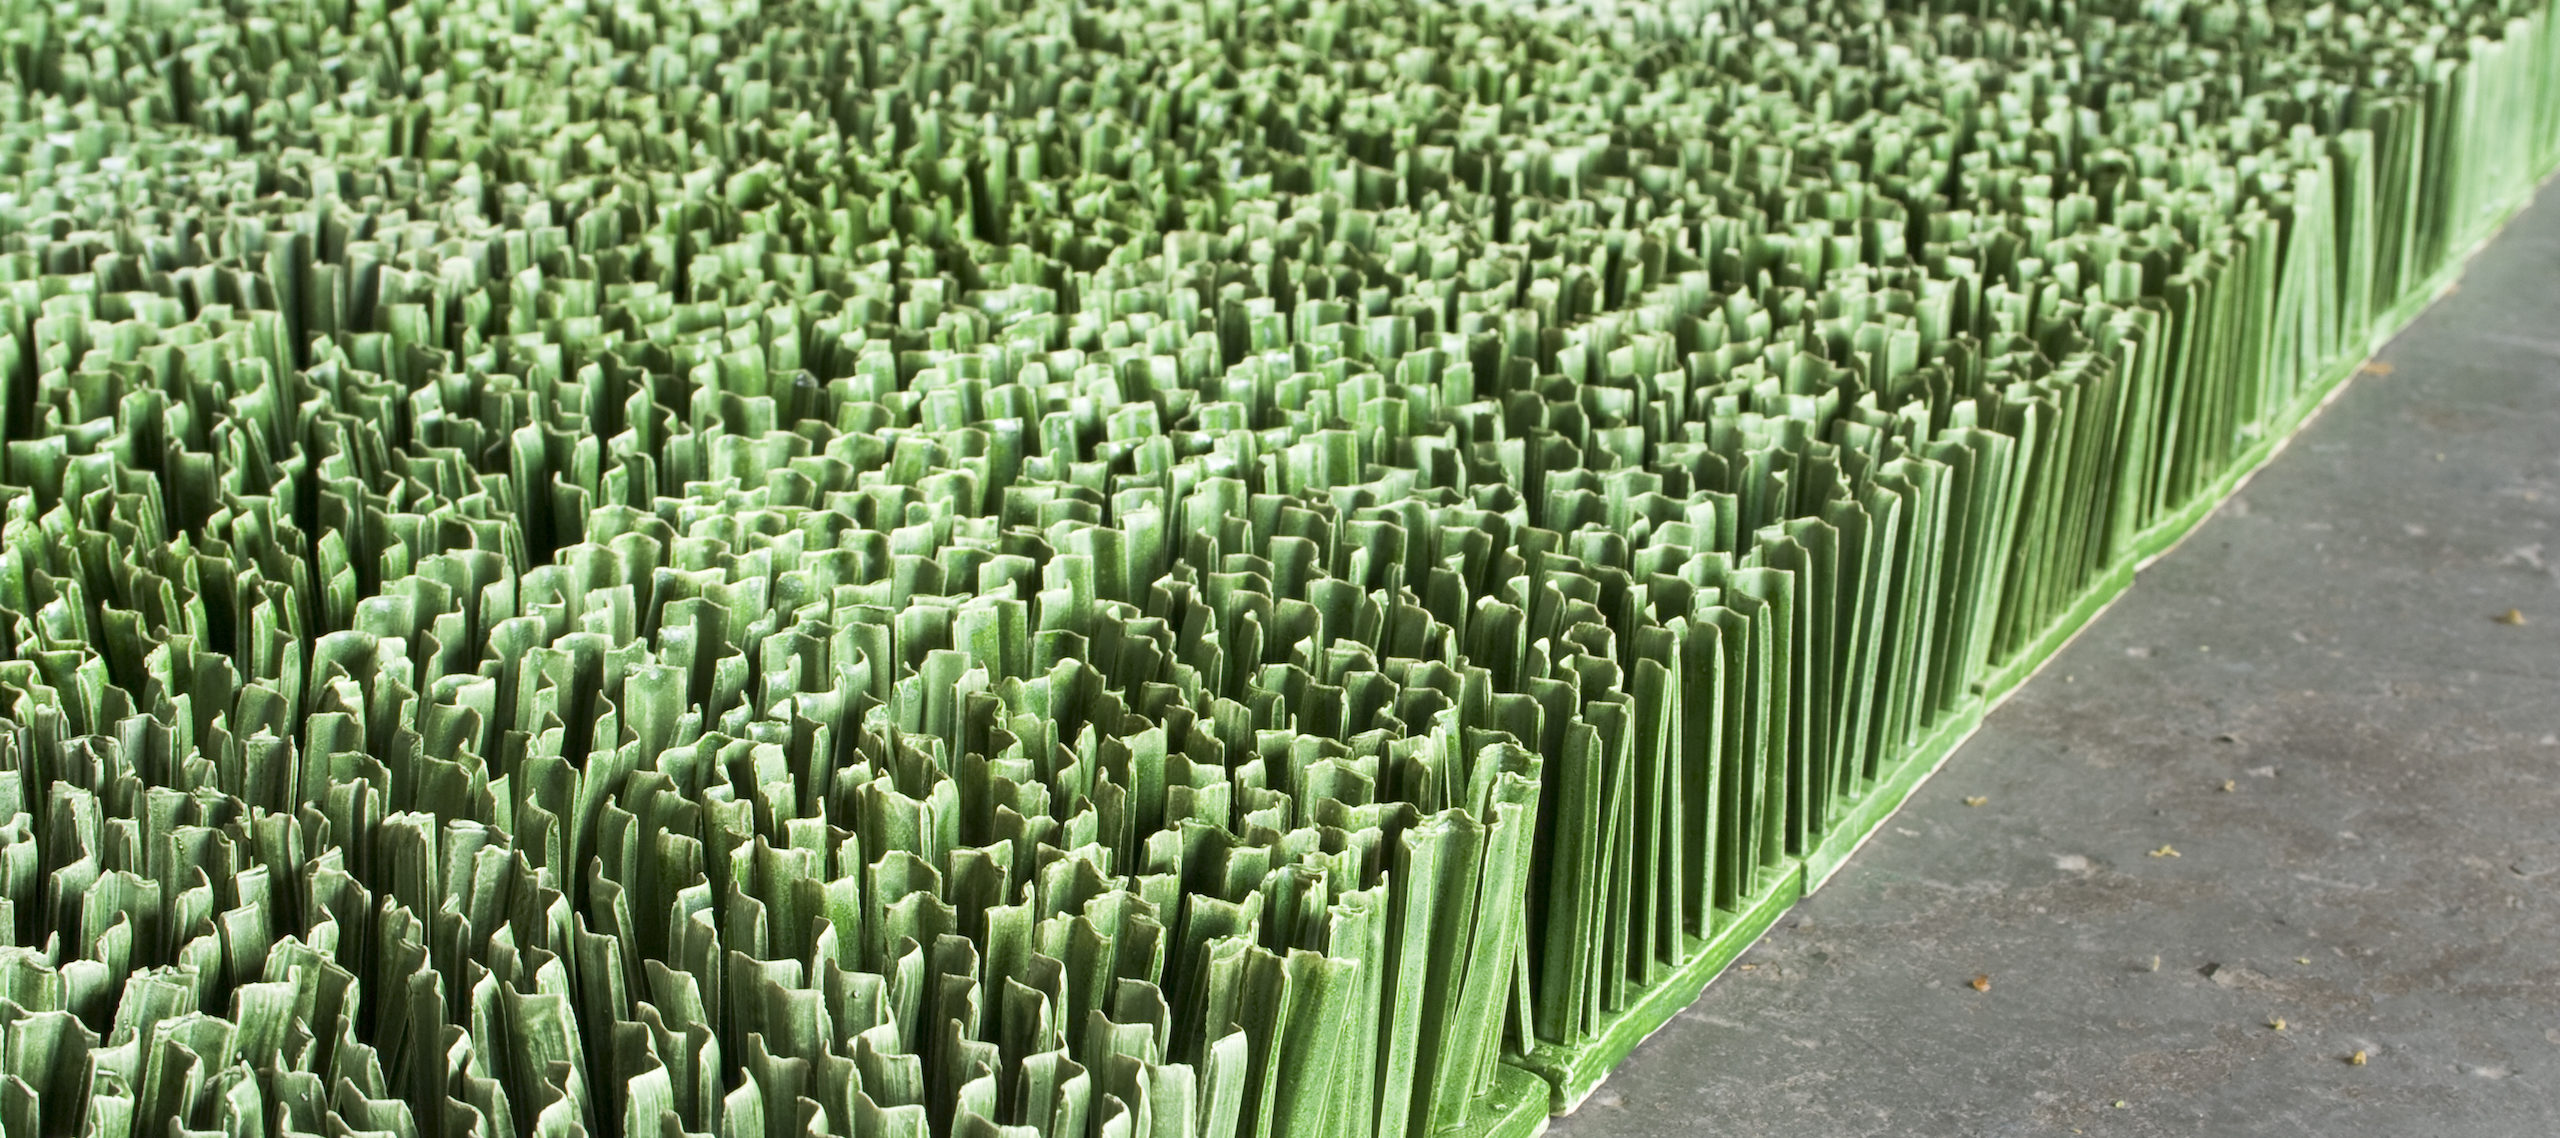 Detail photograph of ceramic sculpture made to look like a patch of lawn. Individual squares consisting of multiple upright blades of porcelain grass, glazed green, fit together to form a lush rectangular field of grass.